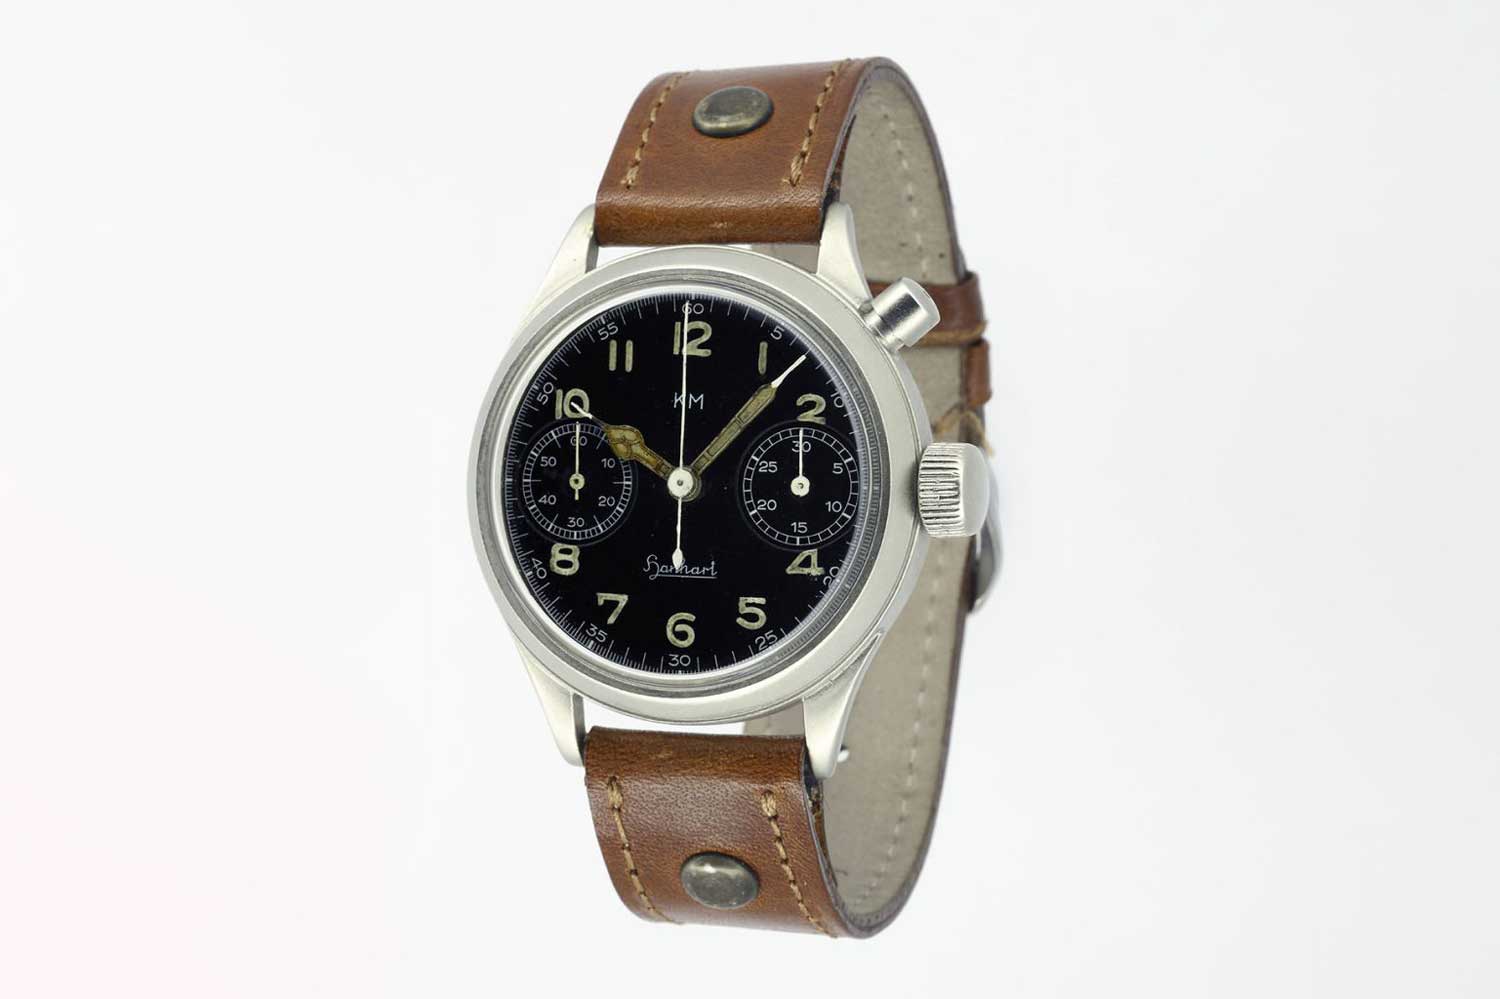 In 1938, Hanhart launched its first modern chronograph powered by the legendary Calibre 40, a monopusher movement which was utilized to create watches for the German Luftwaffe and Navy (Image: Hanhart.com)